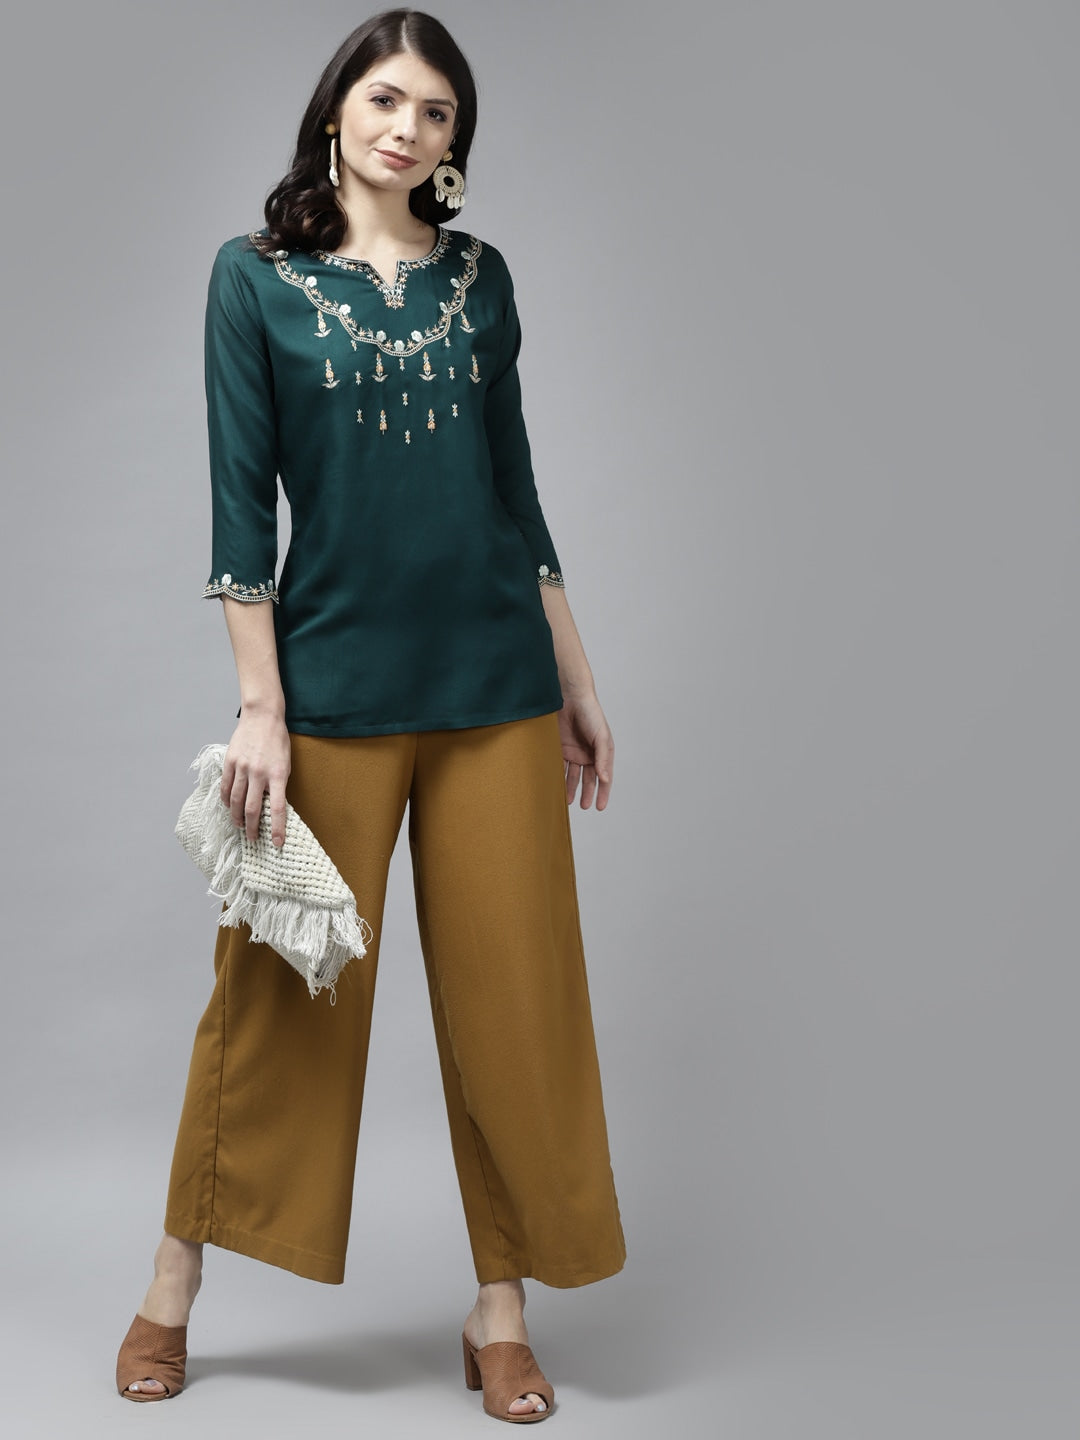 Green Embroidered Top-Yufta Store-9642TOPGRS